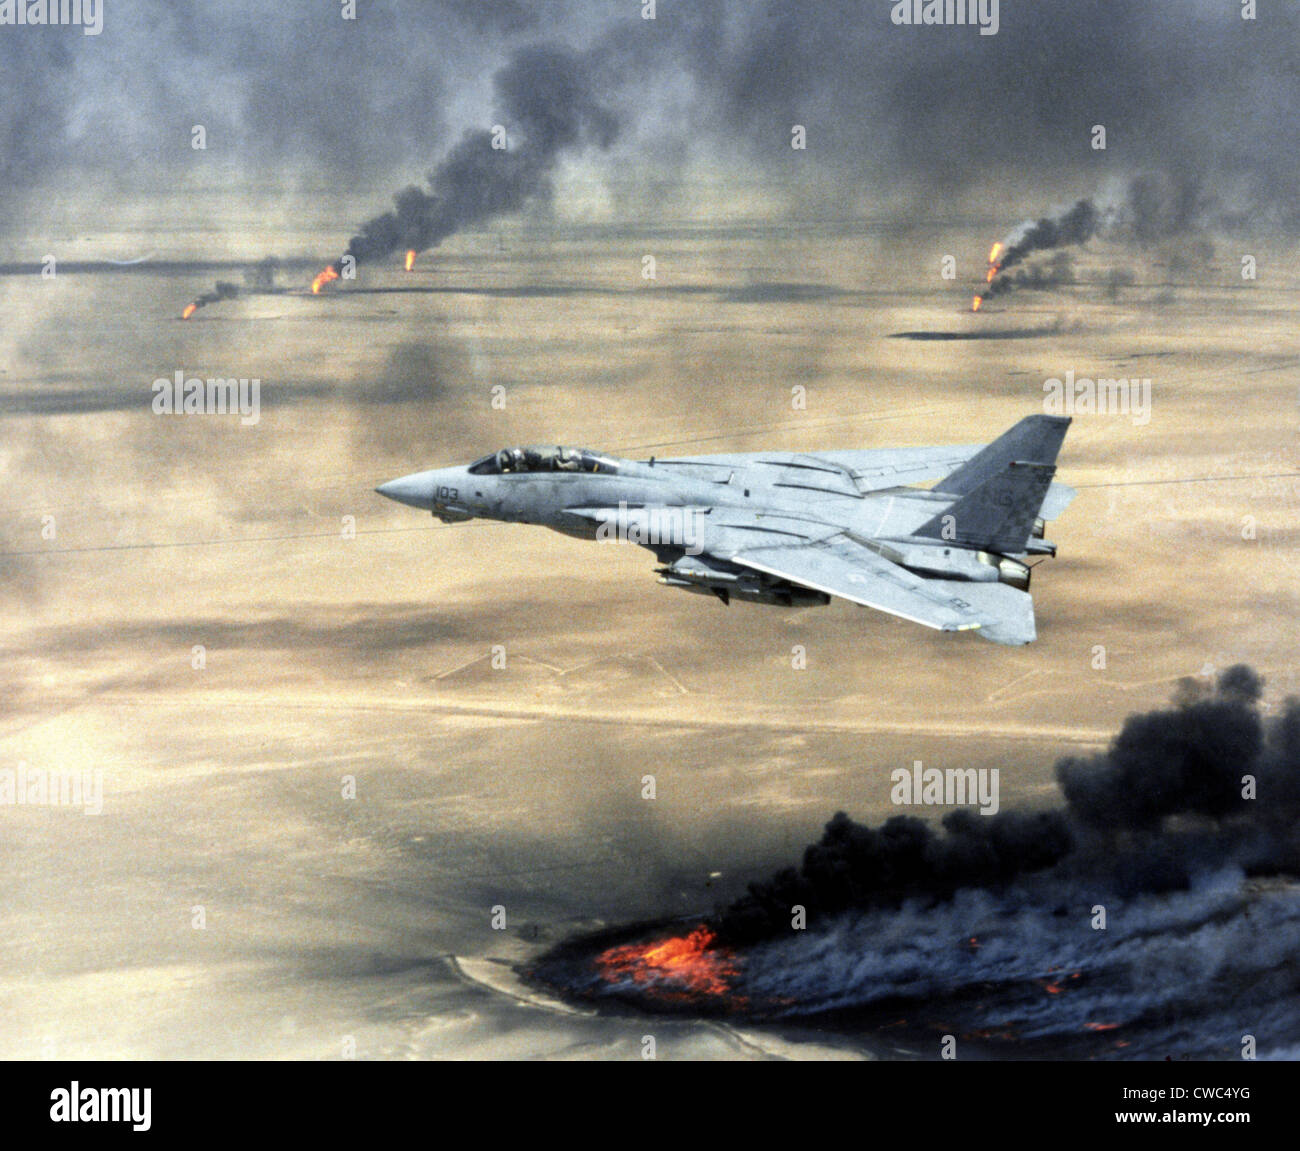 F-14 fighter in flight over burning Kuwaiti oil wells set on fire by retreating Iraqi forces during Operation Desert Storm. Stock Photo